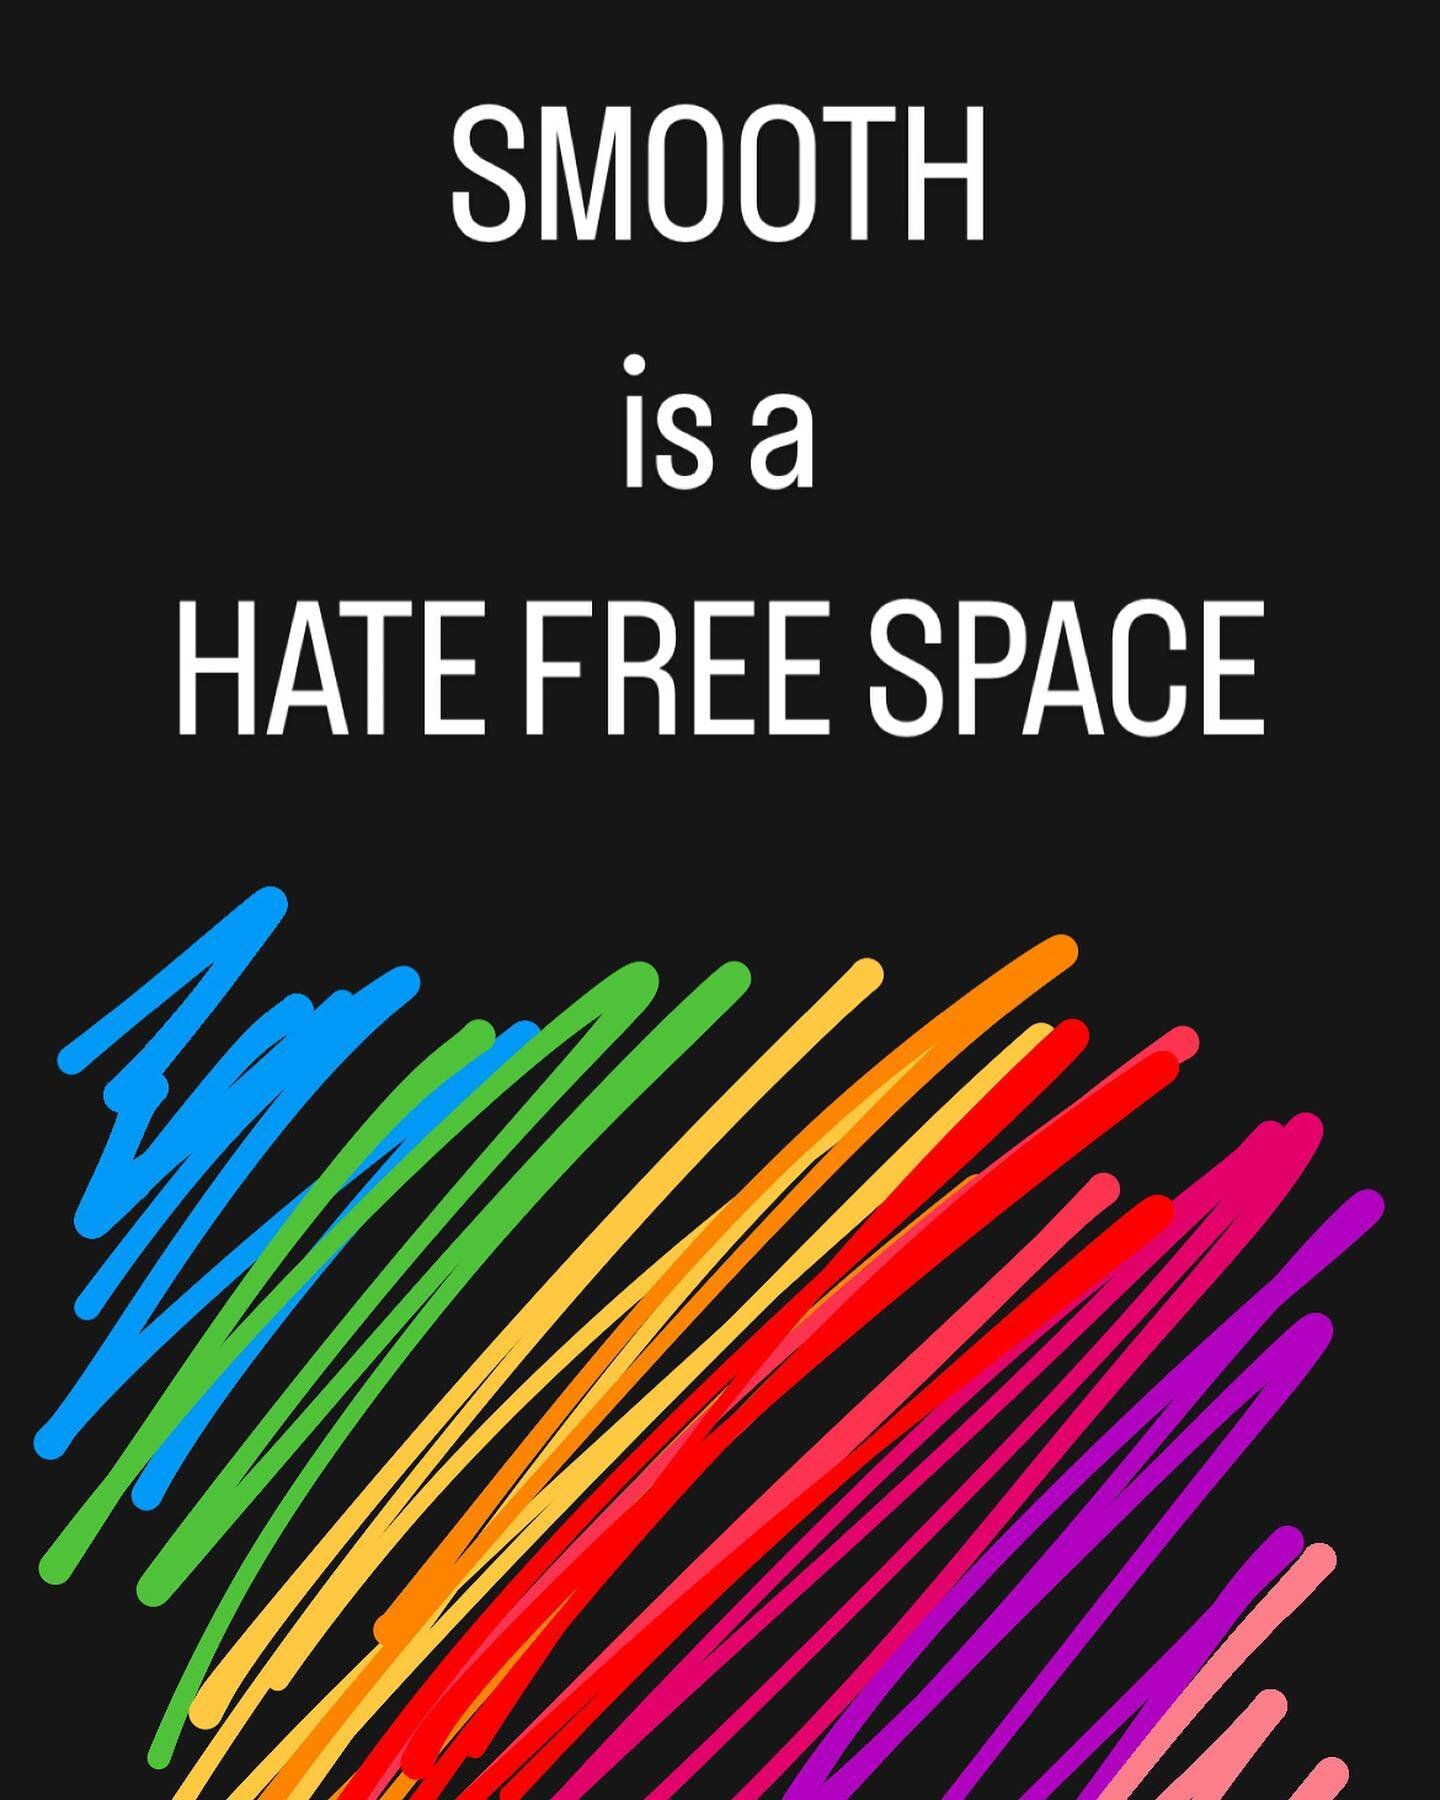 Hatred and ignorance are not welcome in my space. My space is safe for all and if you think otherwise, I&rsquo;ll be happy to never see you again. 

Zero Tolerance Policy